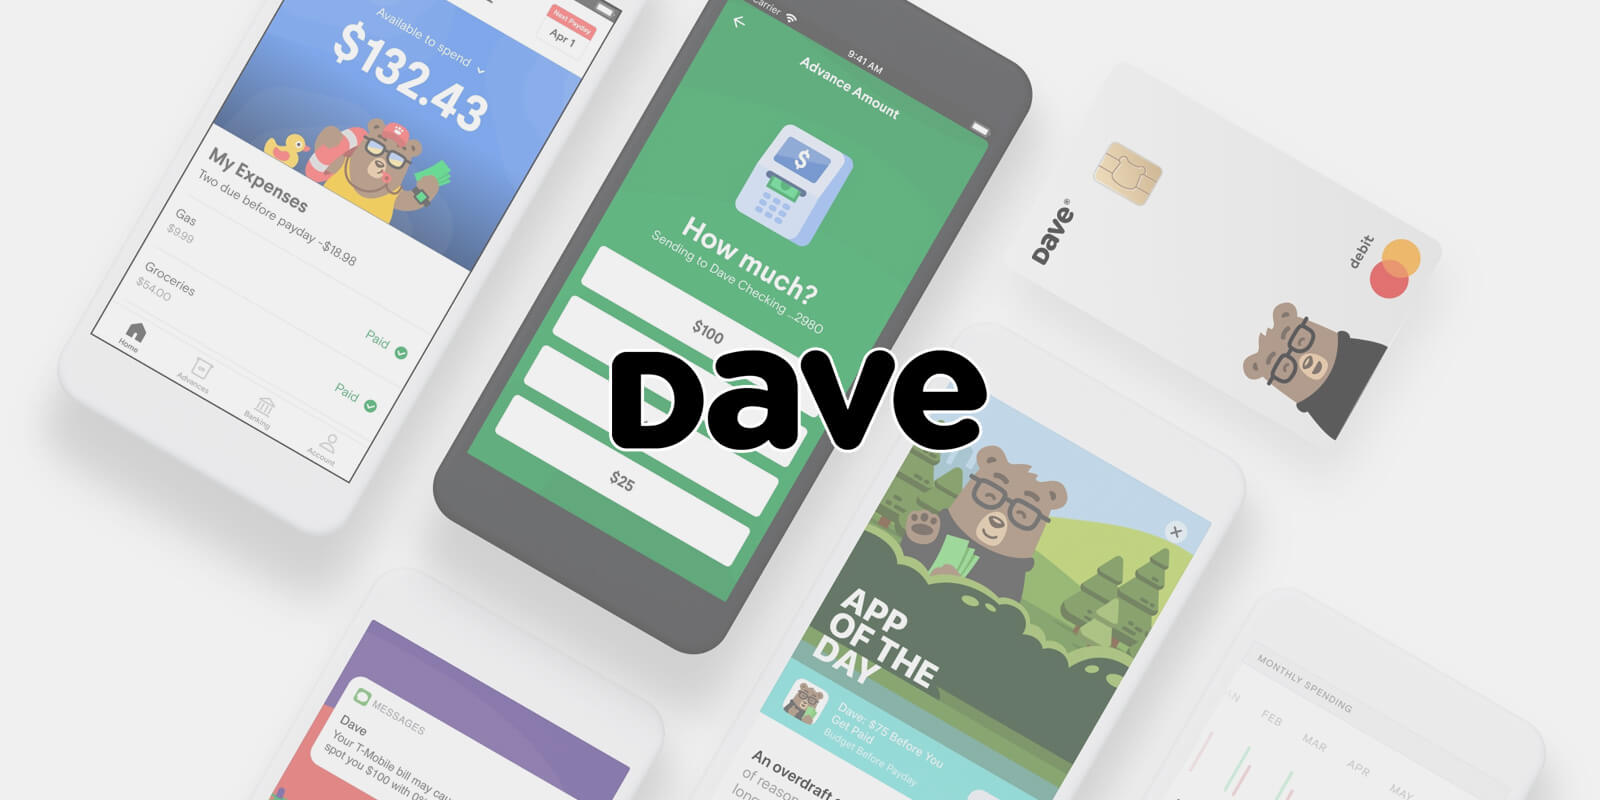 38 Top Pictures Dave Loan App Reddit / 8 Apps Like Dave The Best Cash Advance Apps Turbofuture Technology